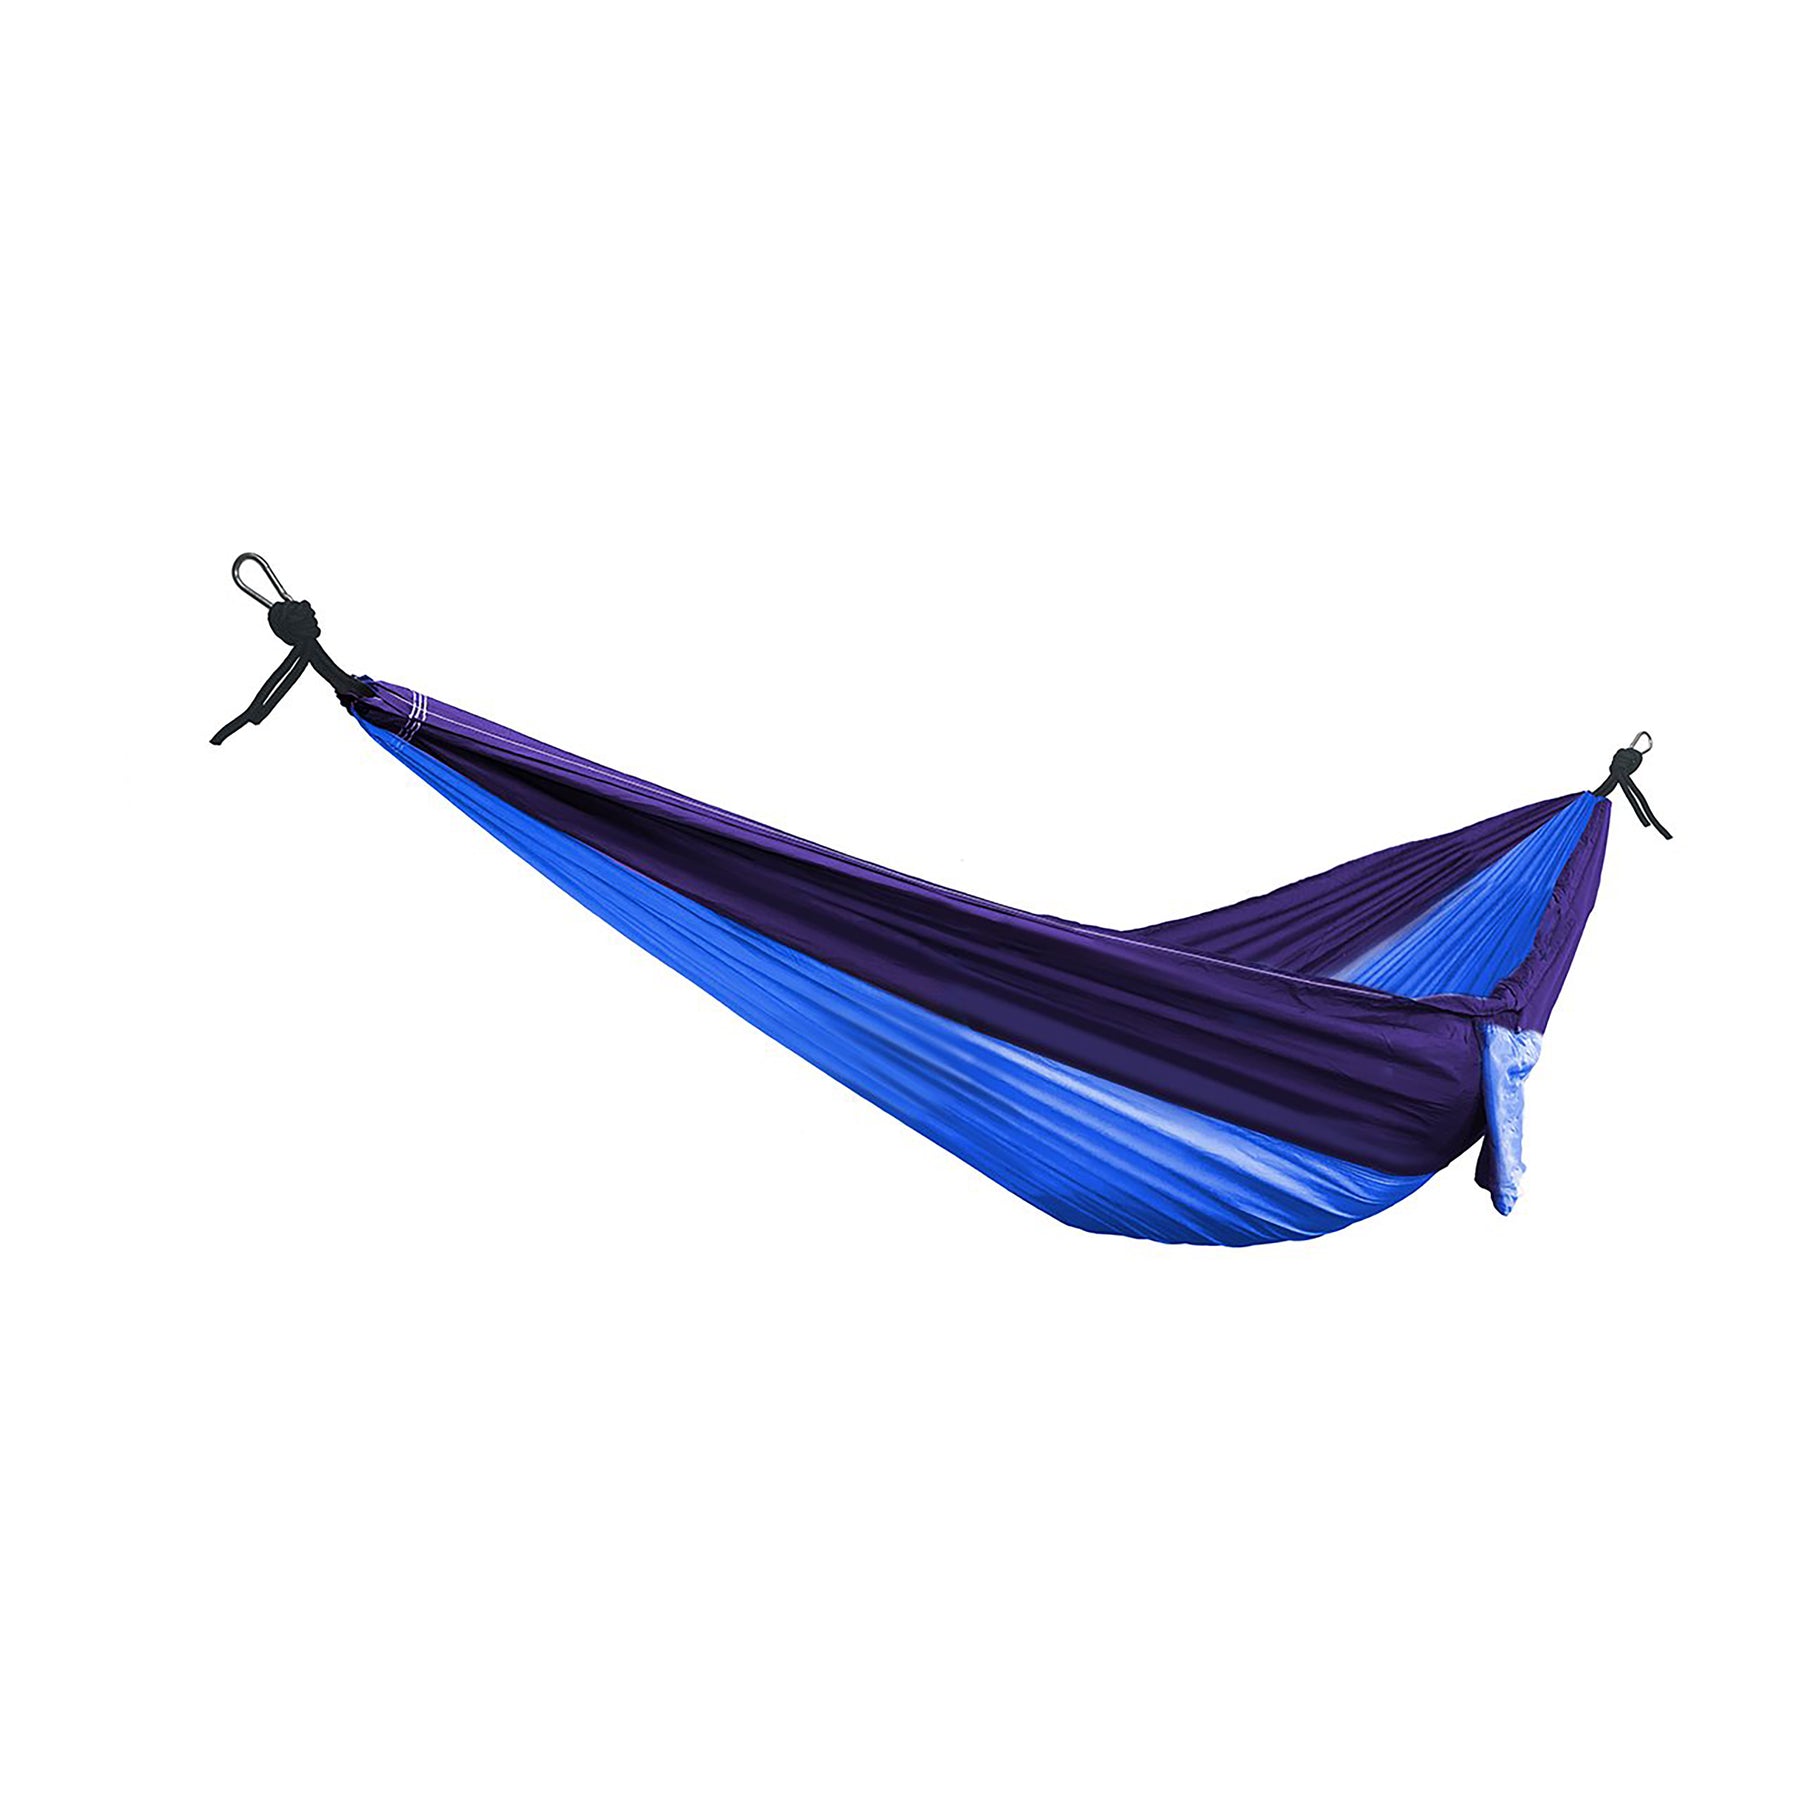 Bliss Hammocks 52-inch Wide Hammock in a Bag with Carabiners and Tree Straps in the royal bliss variation: dark blue on the top half and a light blue color on the bottom.